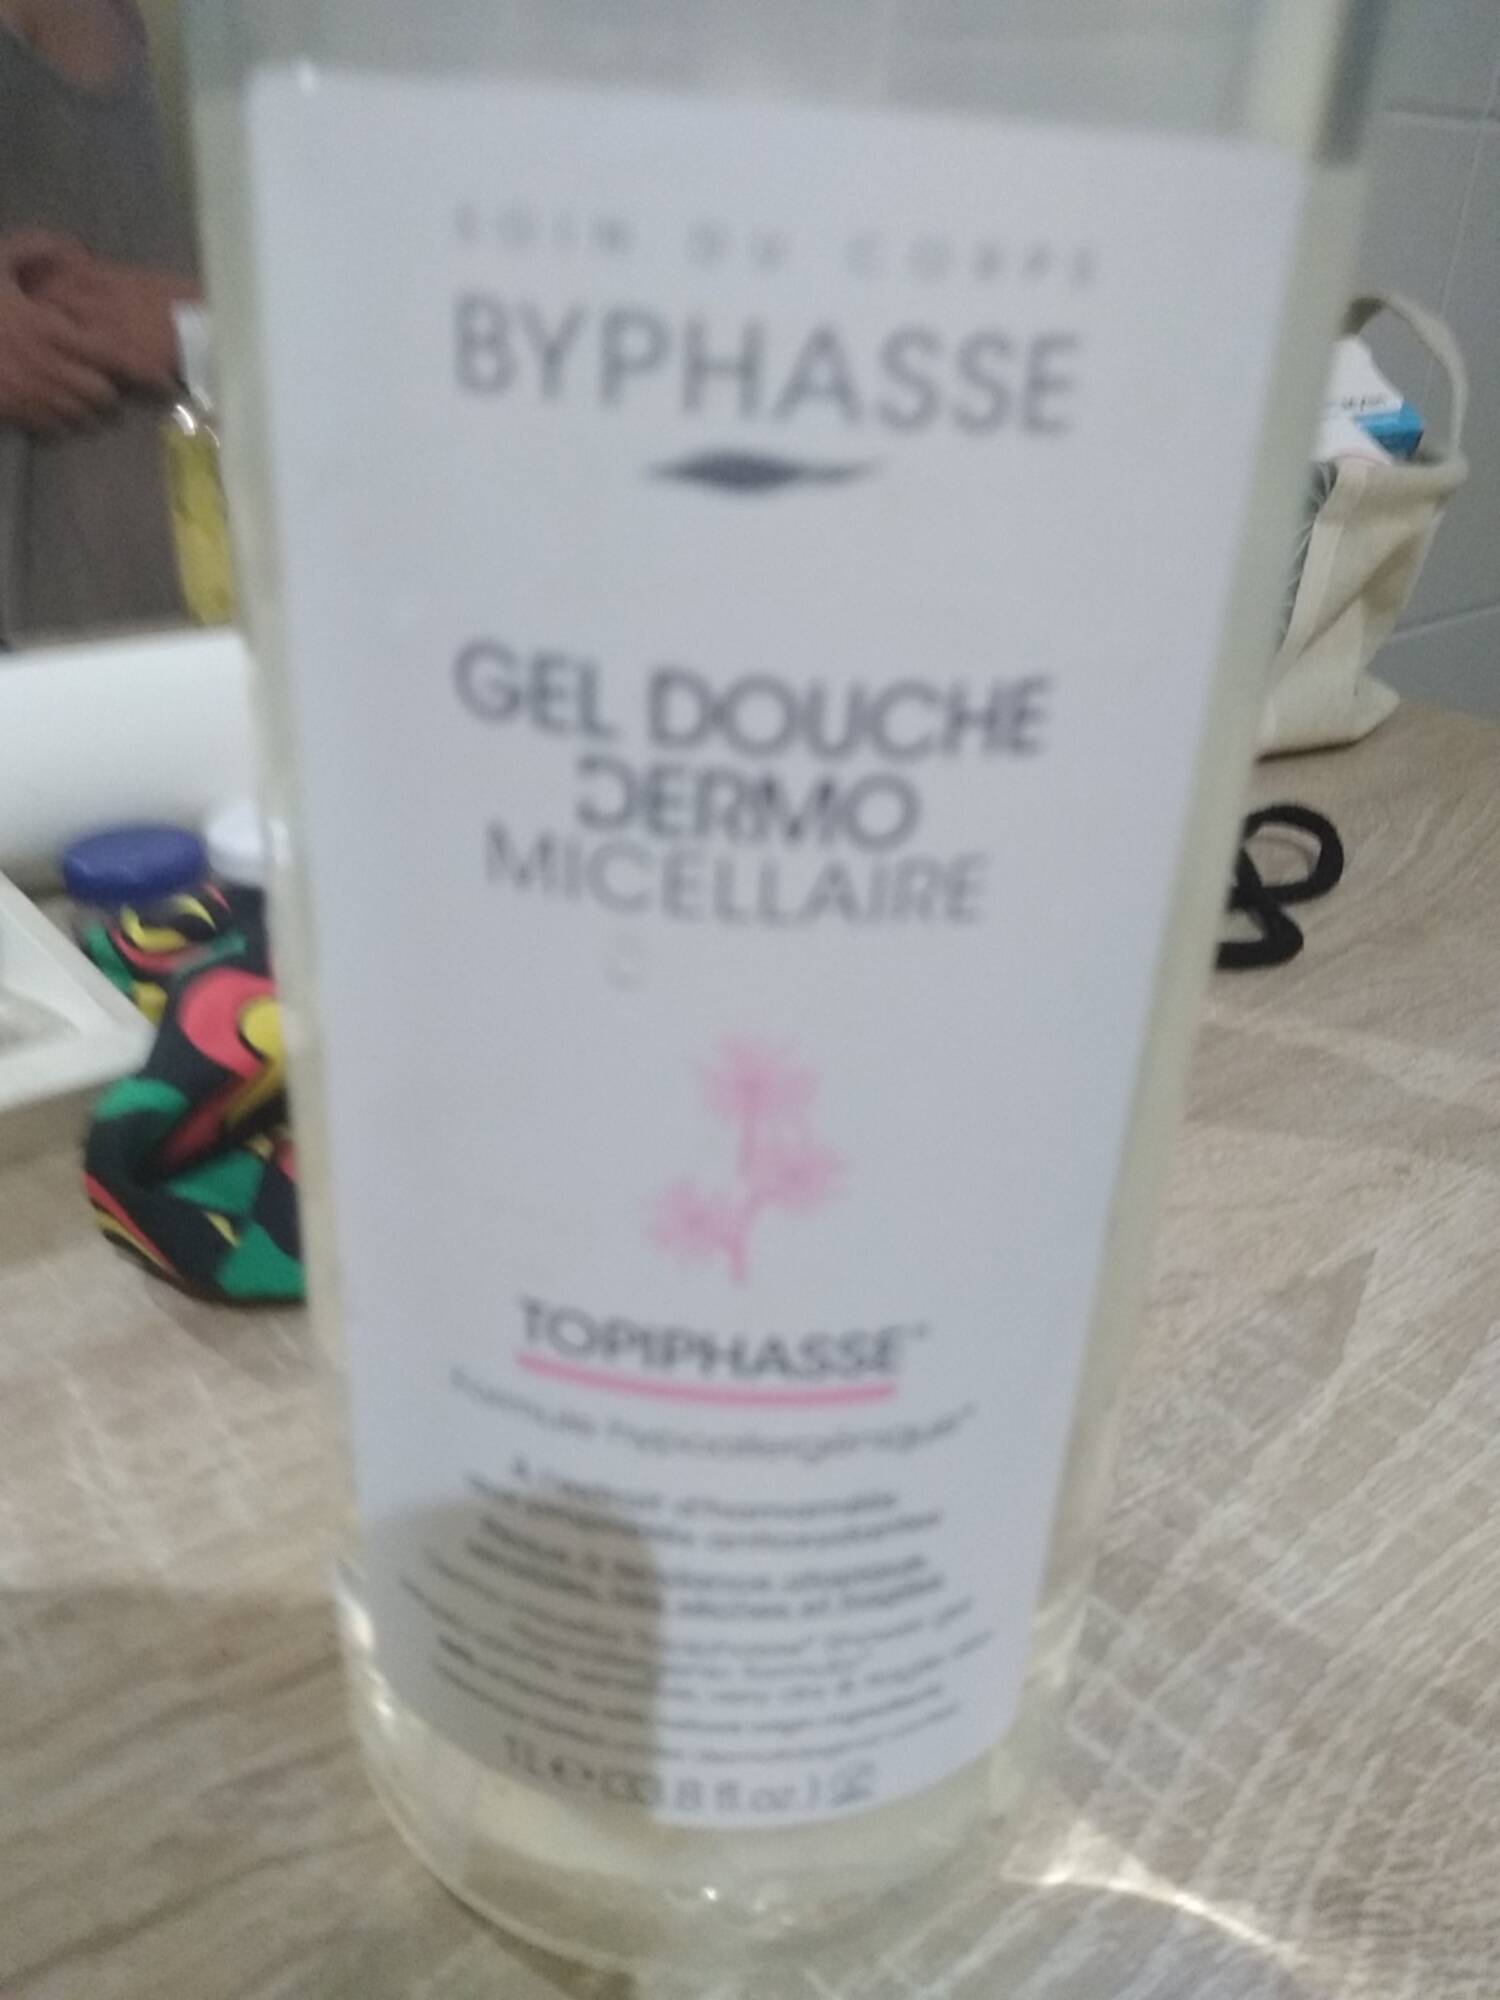 BYPHASSE - Topiphasse - Gel douche dermo micellaire 